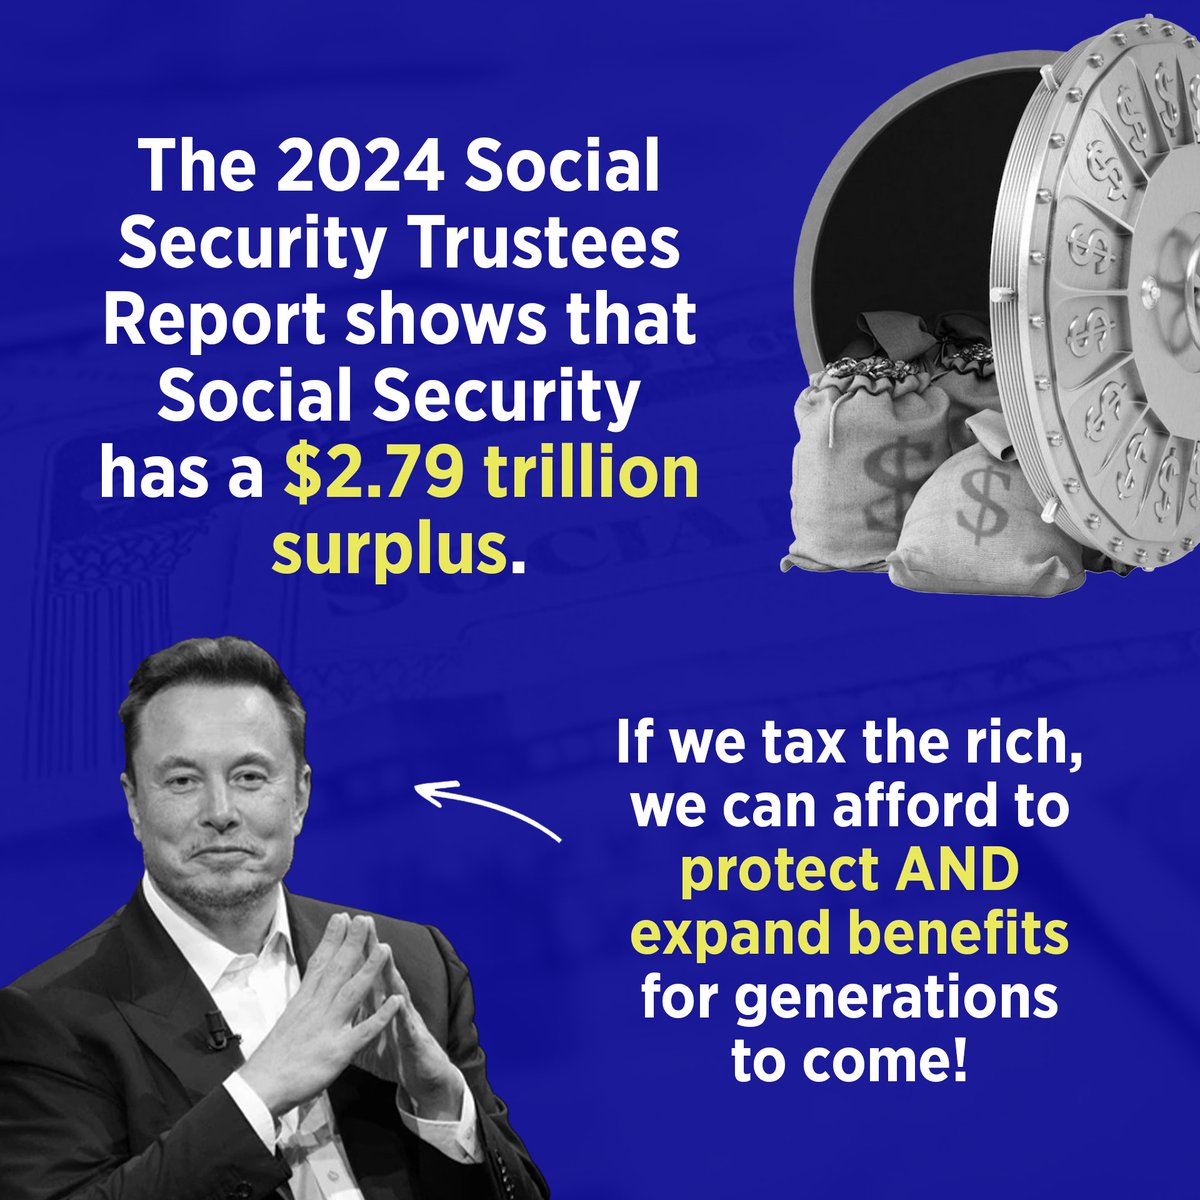 #wtpBLUE #wtpGOTV24 #VoteBlue 

The only reason why social security was ever in jeopardy is because of republicans. The only reason why social security would ever become unsustainable is because of republicans. Time to JUST SAY NO to voting for republicans & TAX THE RICH! 💙🌊